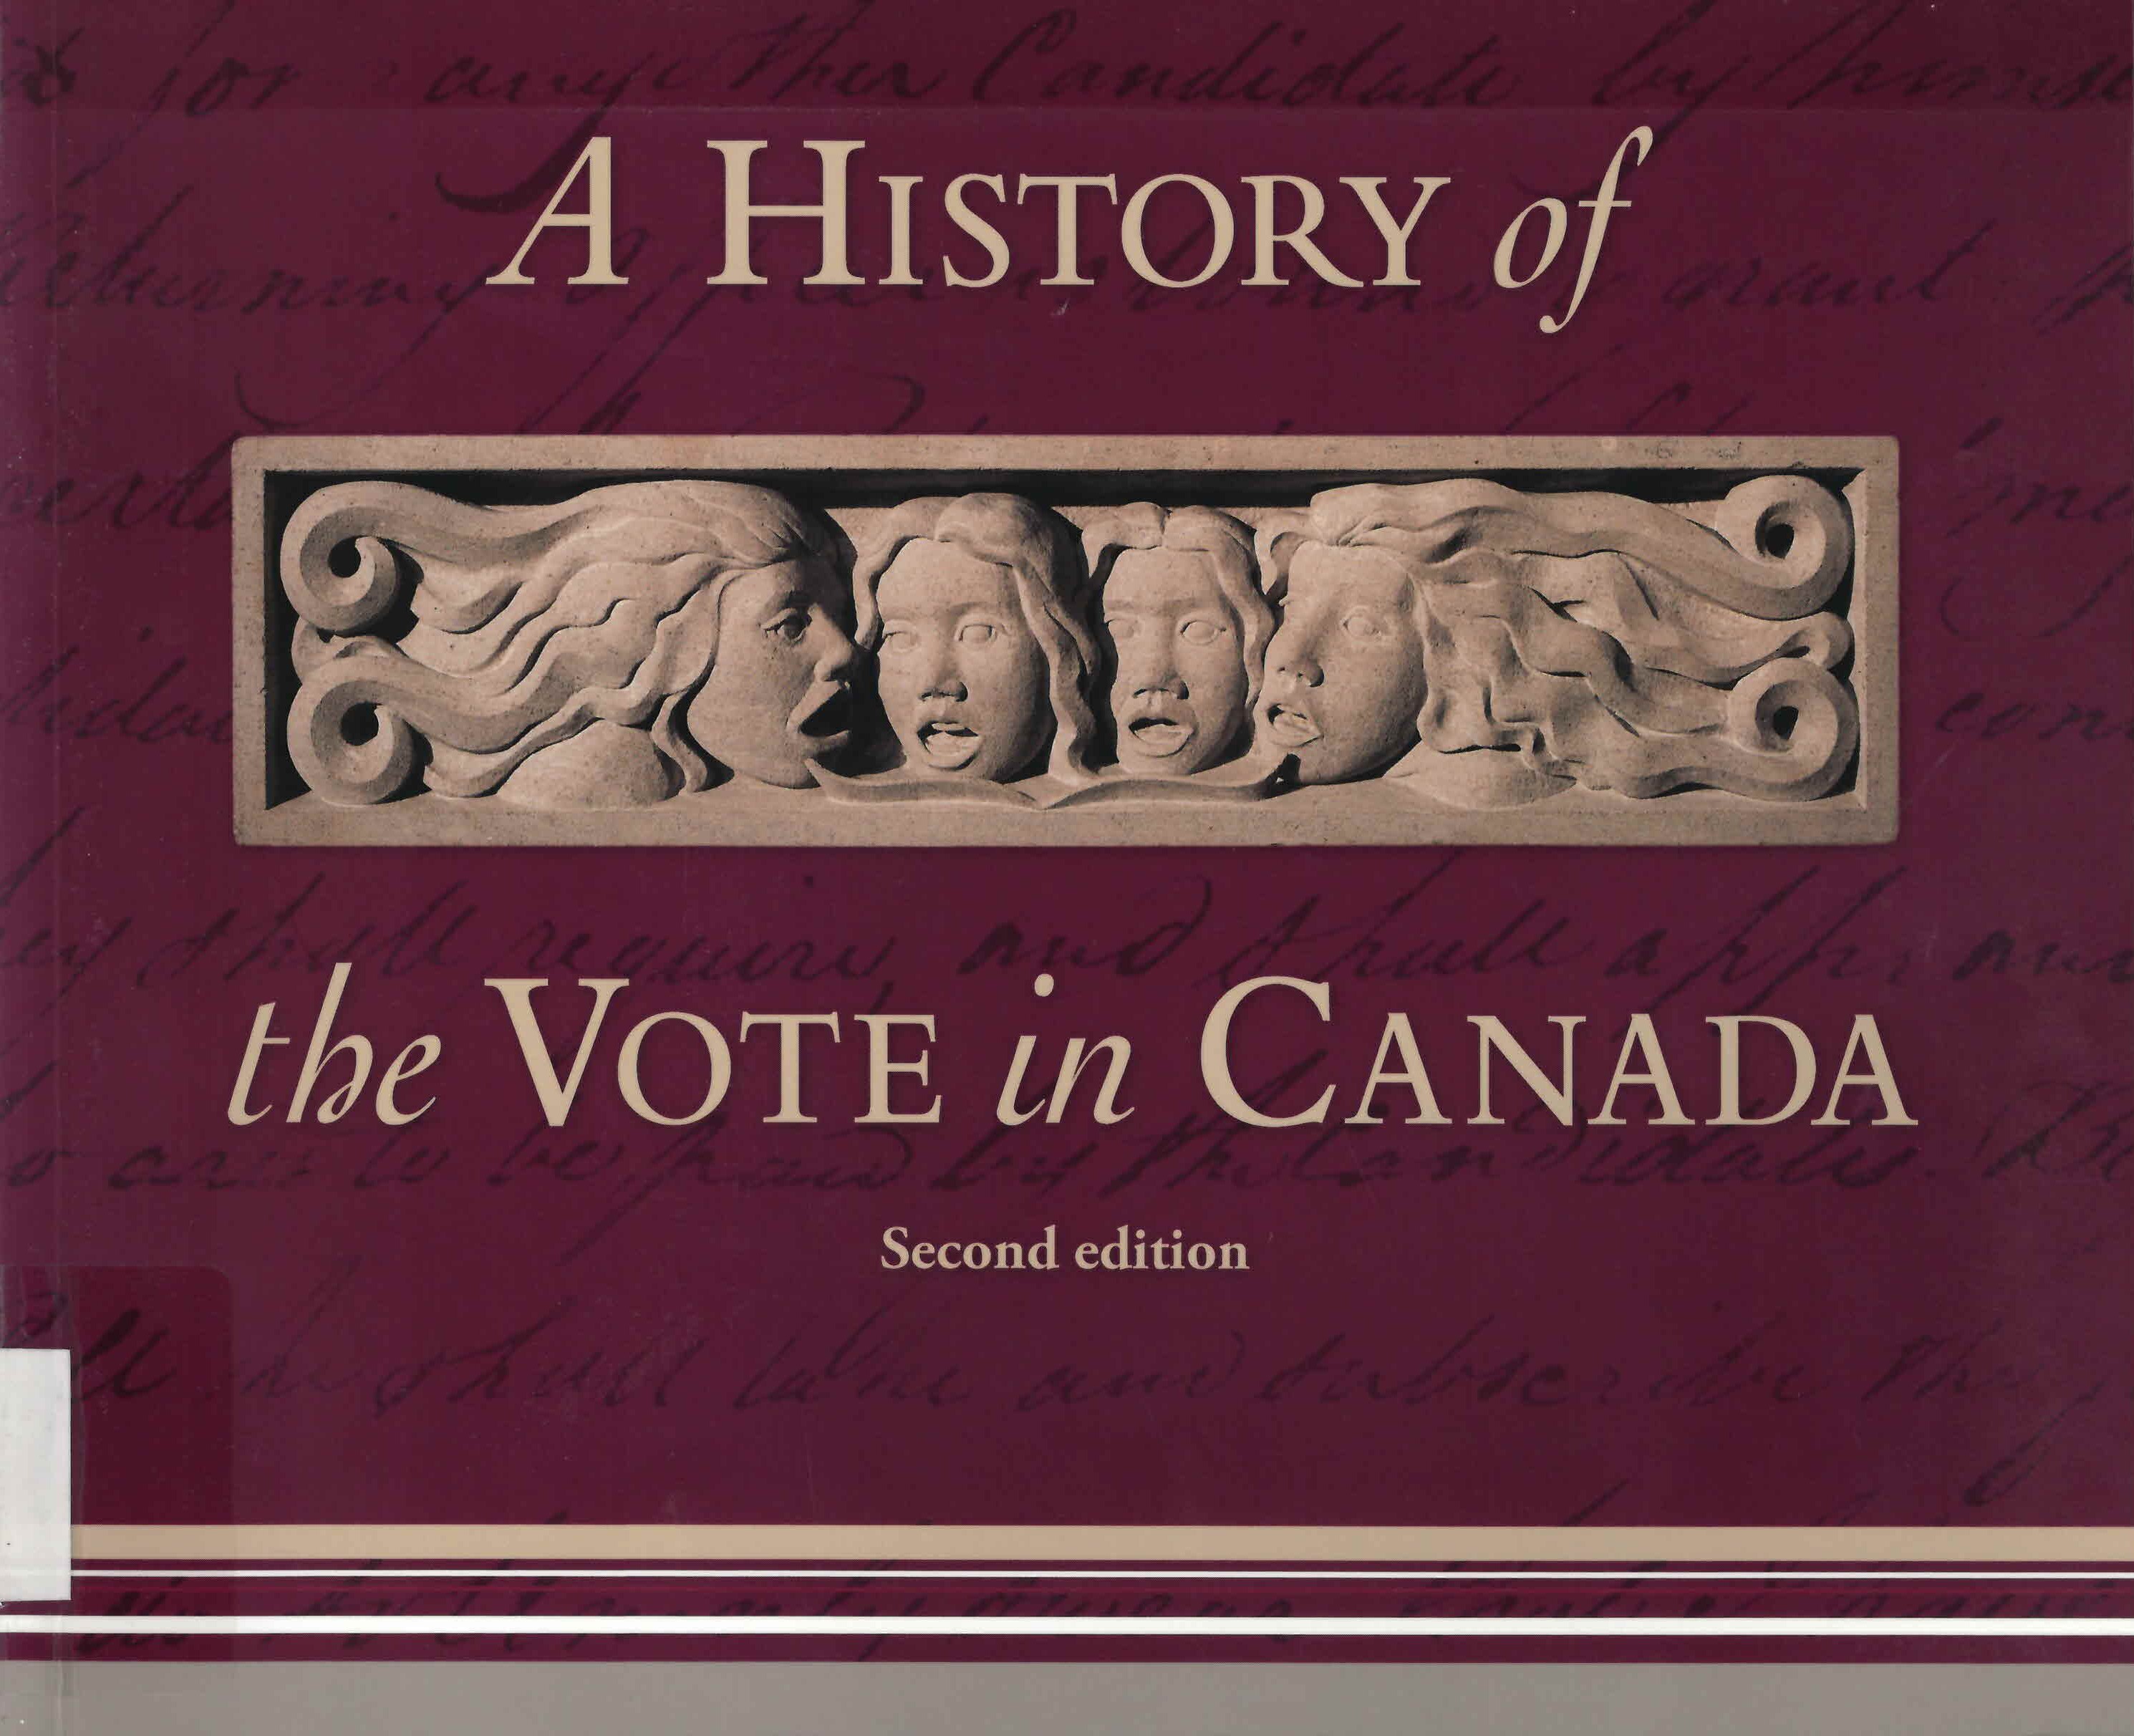 A History of the vote in Canada.